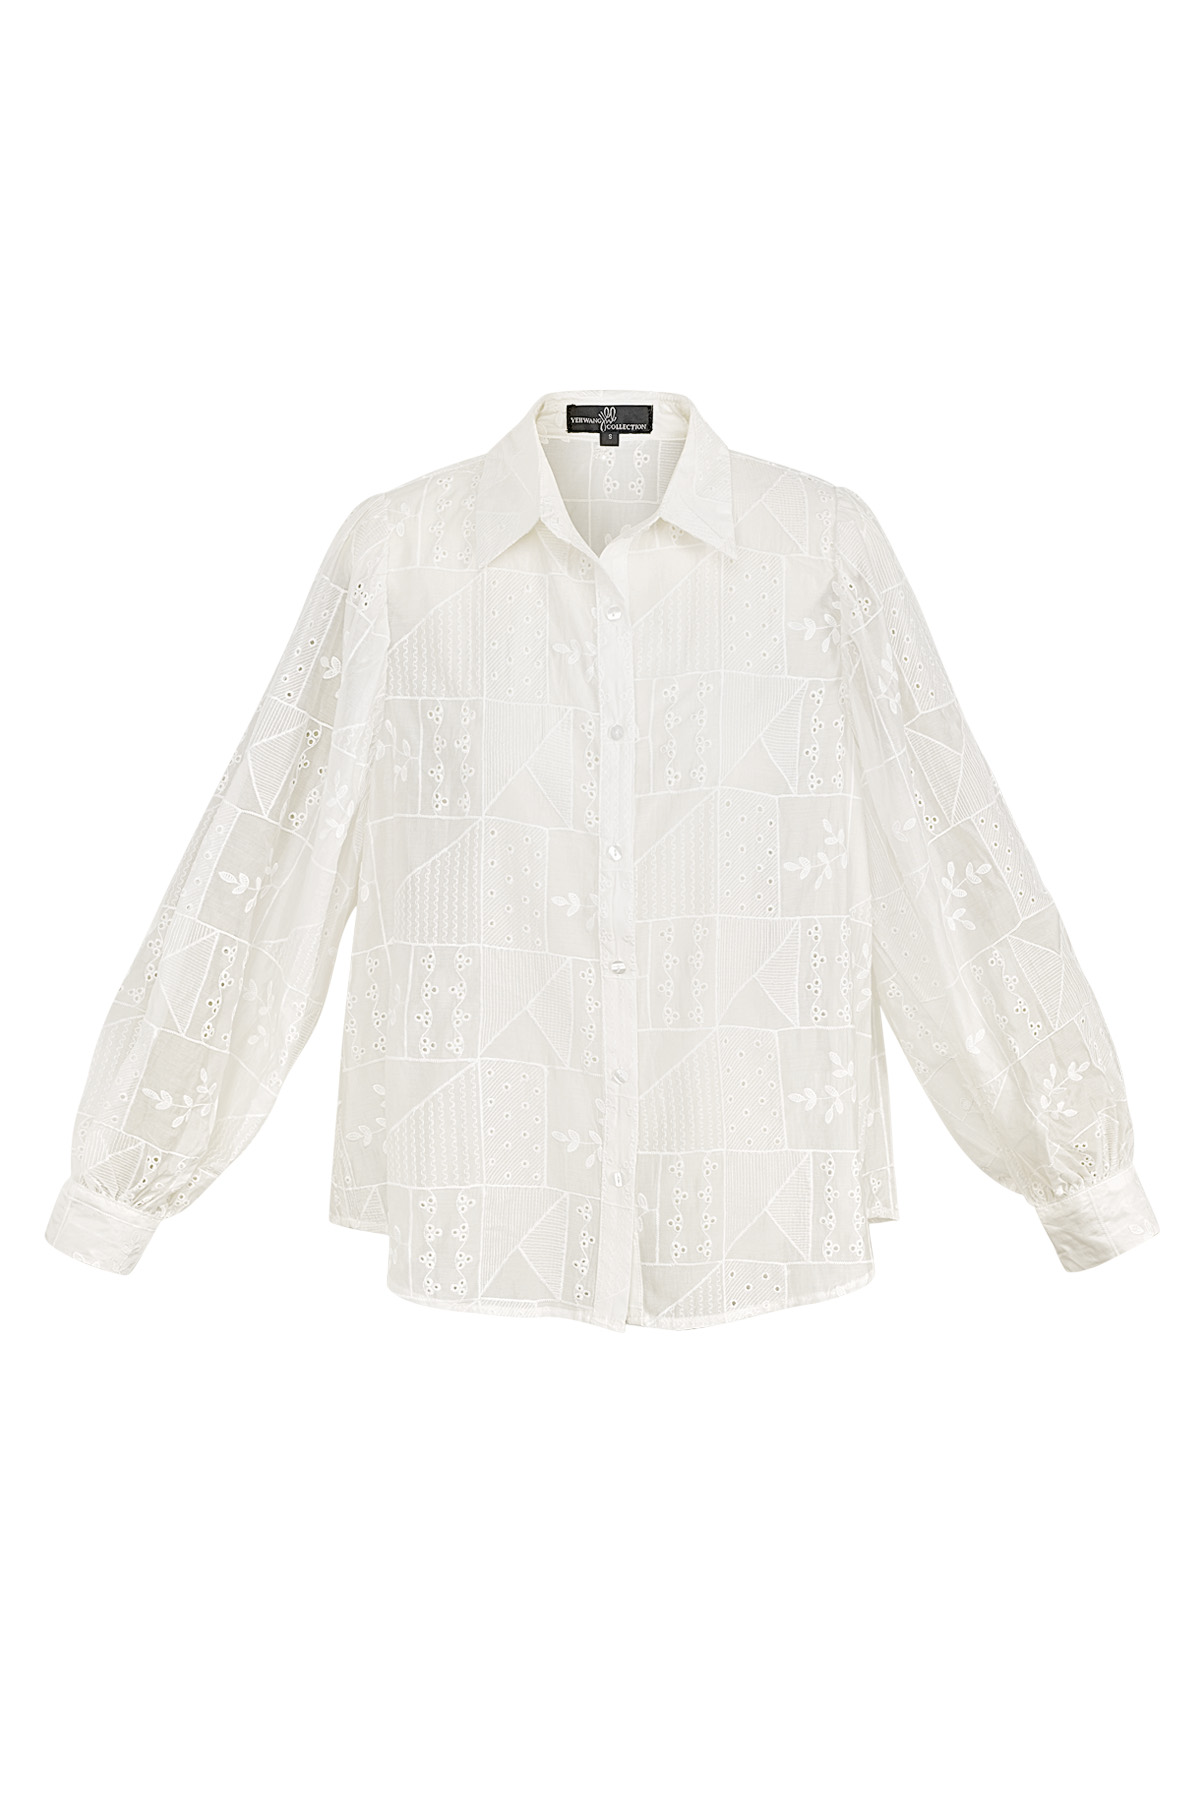 Blouse embroidered print white